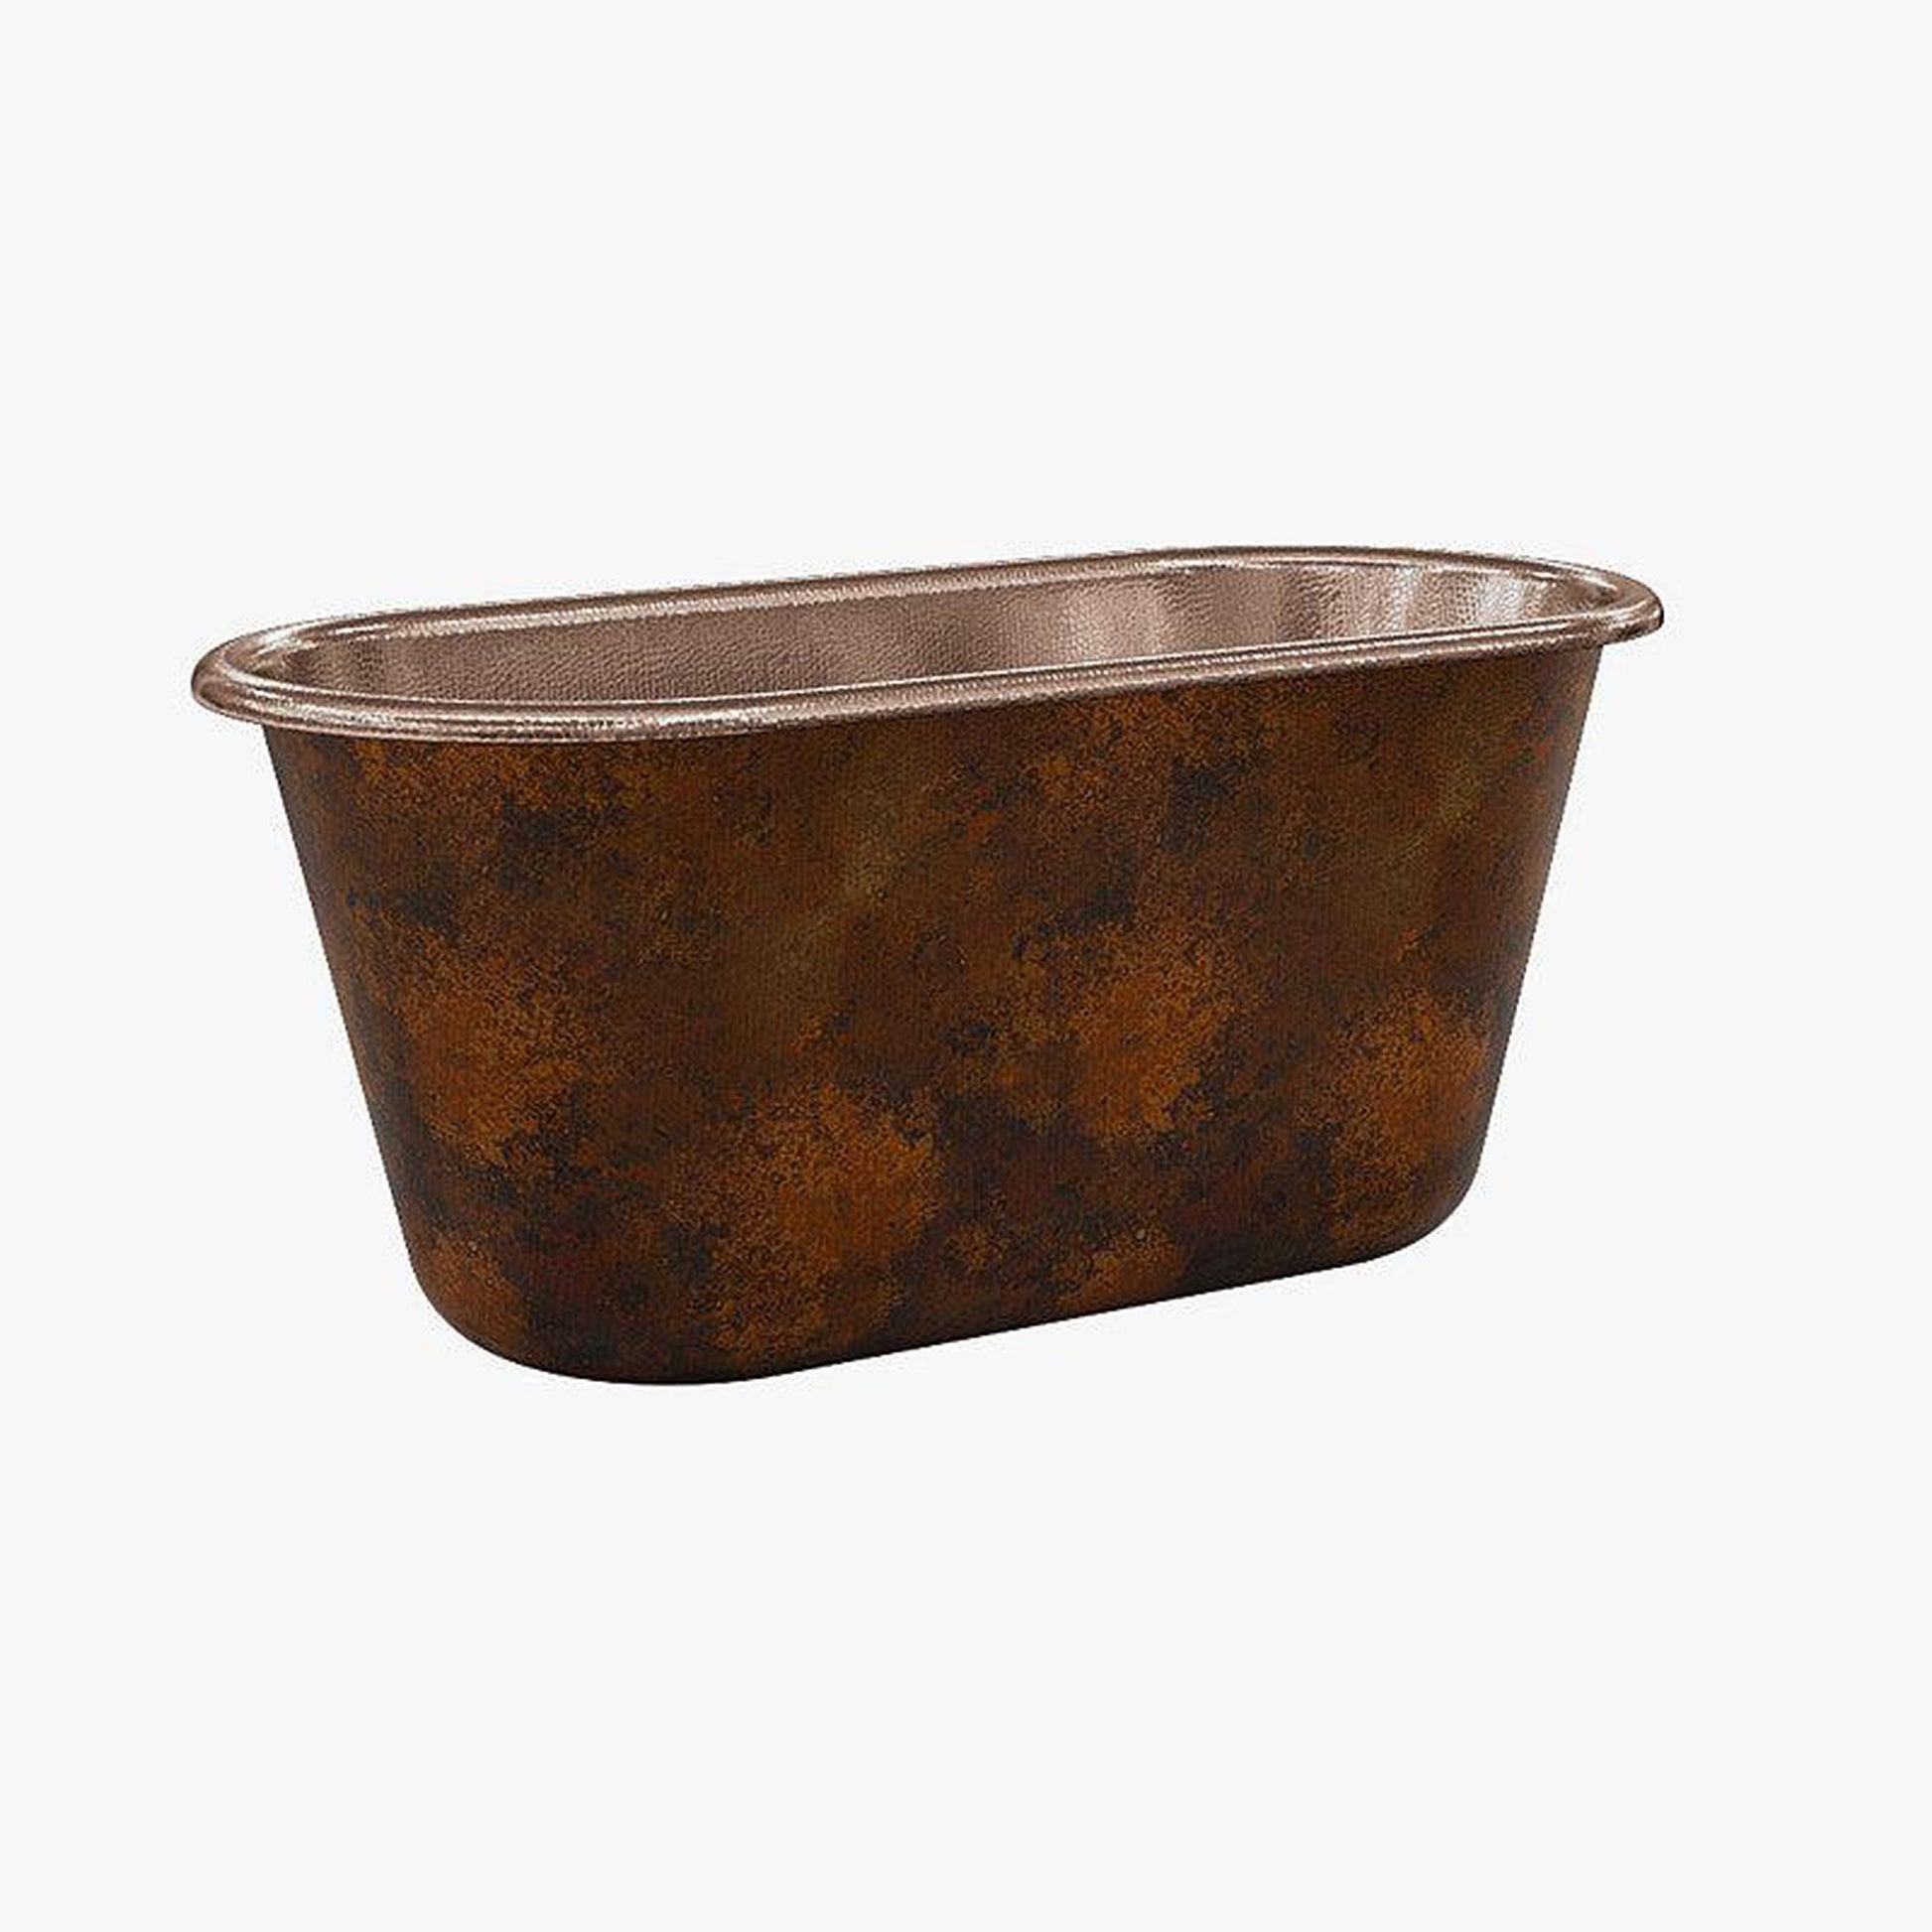 CopperSmith Heritage HX1 60" x 31" x 31" 16-Gauge Fire Copper Freestanding Bathtub With Polished Copper Interior and Polished Brass Overflow Drain and Brushed Nickel Tub Filler